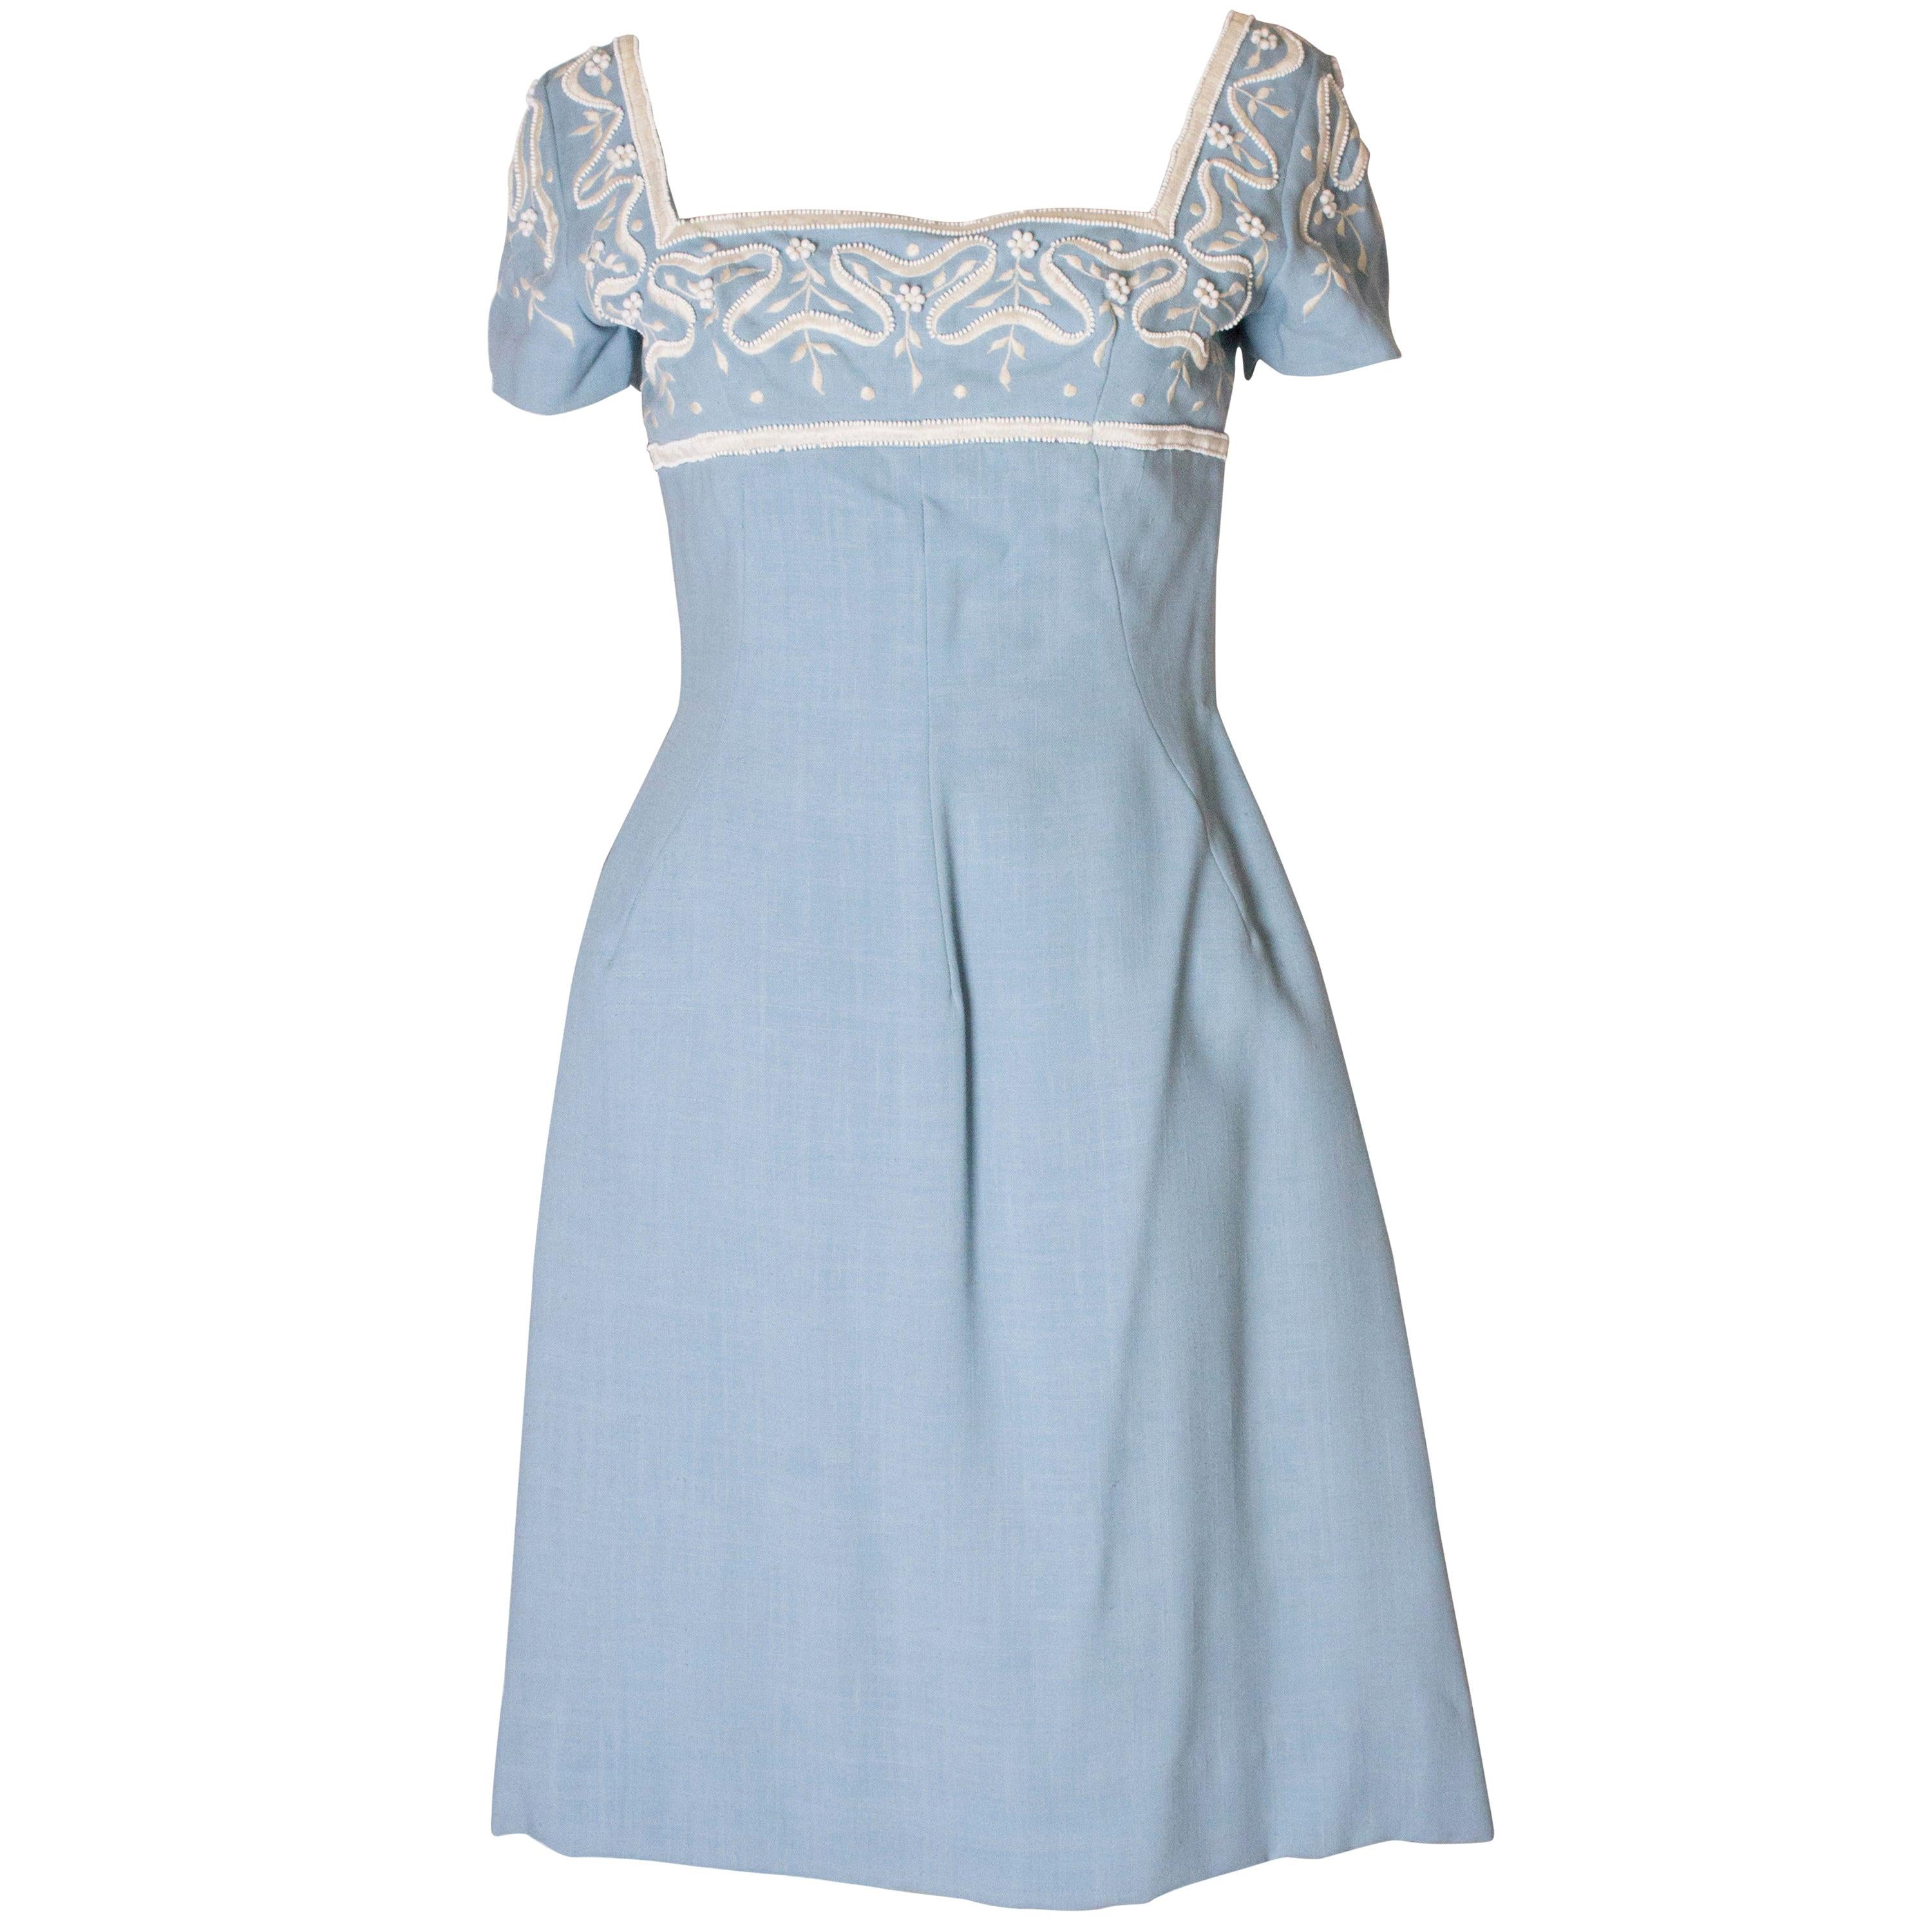 A Vintage Jean Allen 1960s Pale Blue Cotton and Beaded Day Dress